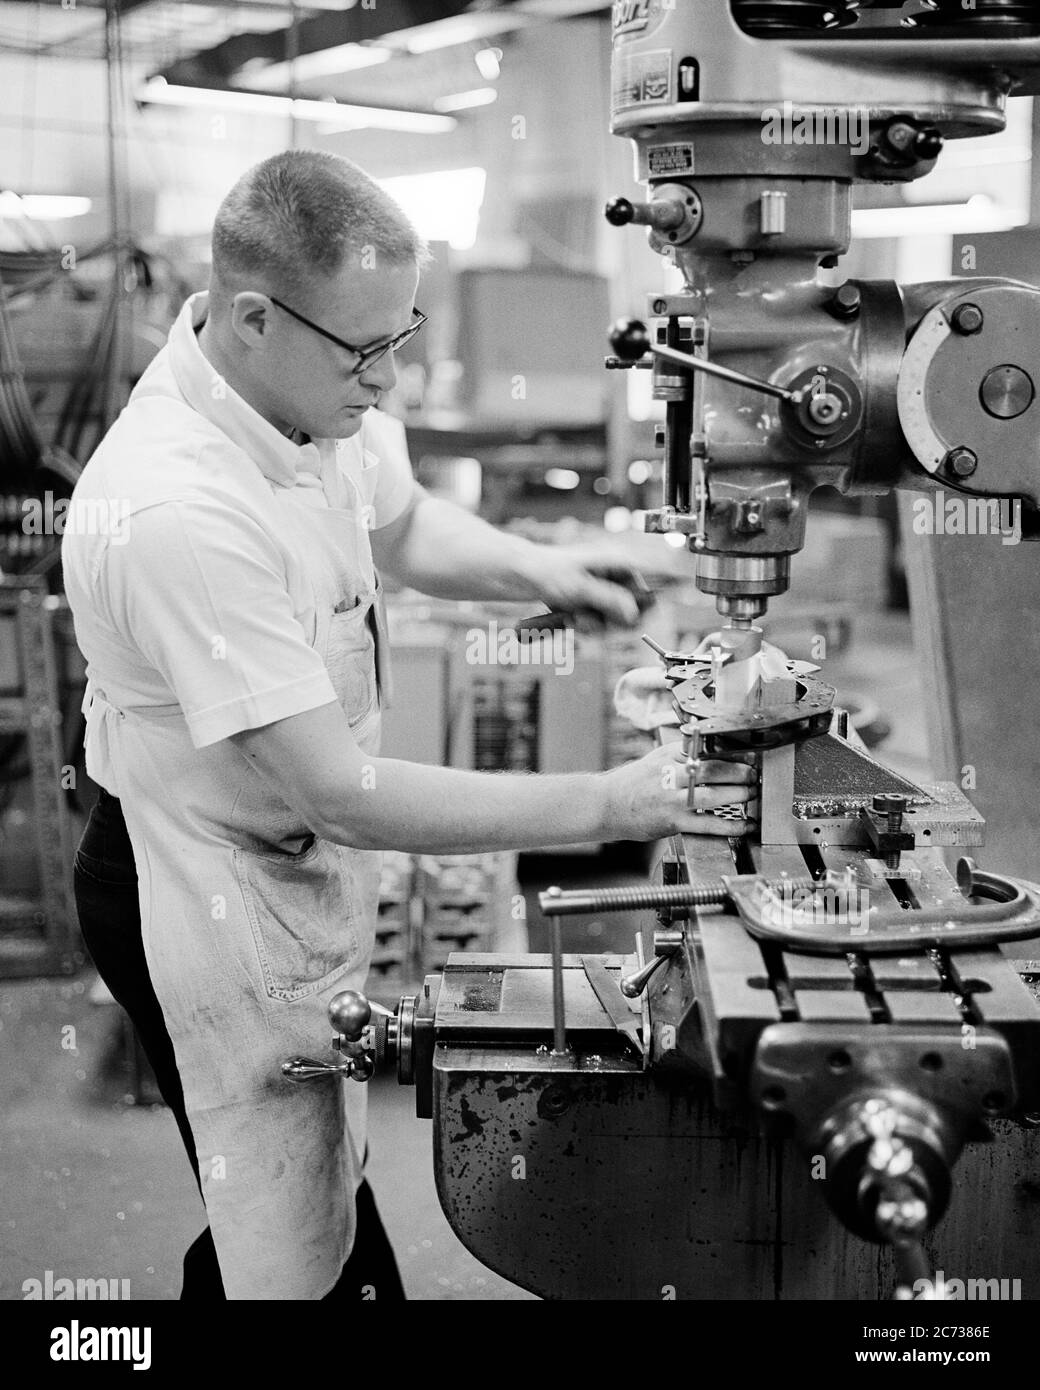 1960s 1970s SKILLED MAN MACHINIST OPERATING A HORIZONTAL MILLING MACHINE IN A MANUFACTURING FACTORY TOOL ROOM SHOP - i5521 HAR001 HARS MALES PROFESSION CONFIDENCE B&W GOALS SKILL OCCUPATION SKILLS OPERATING WELLNESS CUSTOMER SERVICE CAREERS KNOWLEDGE INNOVATION PRIDE A IN OPPORTUNITY EMPLOYMENT MANUFACTURING OCCUPATIONS MOTION BLUR CONCEPTUAL SKILLED EMPLOYEE CREATIVITY MID-ADULT MID-ADULT MAN PRECISION WAGE EARNER BLACK AND WHITE CAUCASIAN ETHNICITY HAR001 MACHINIST MILLING OLD FASHIONED Stock Photo